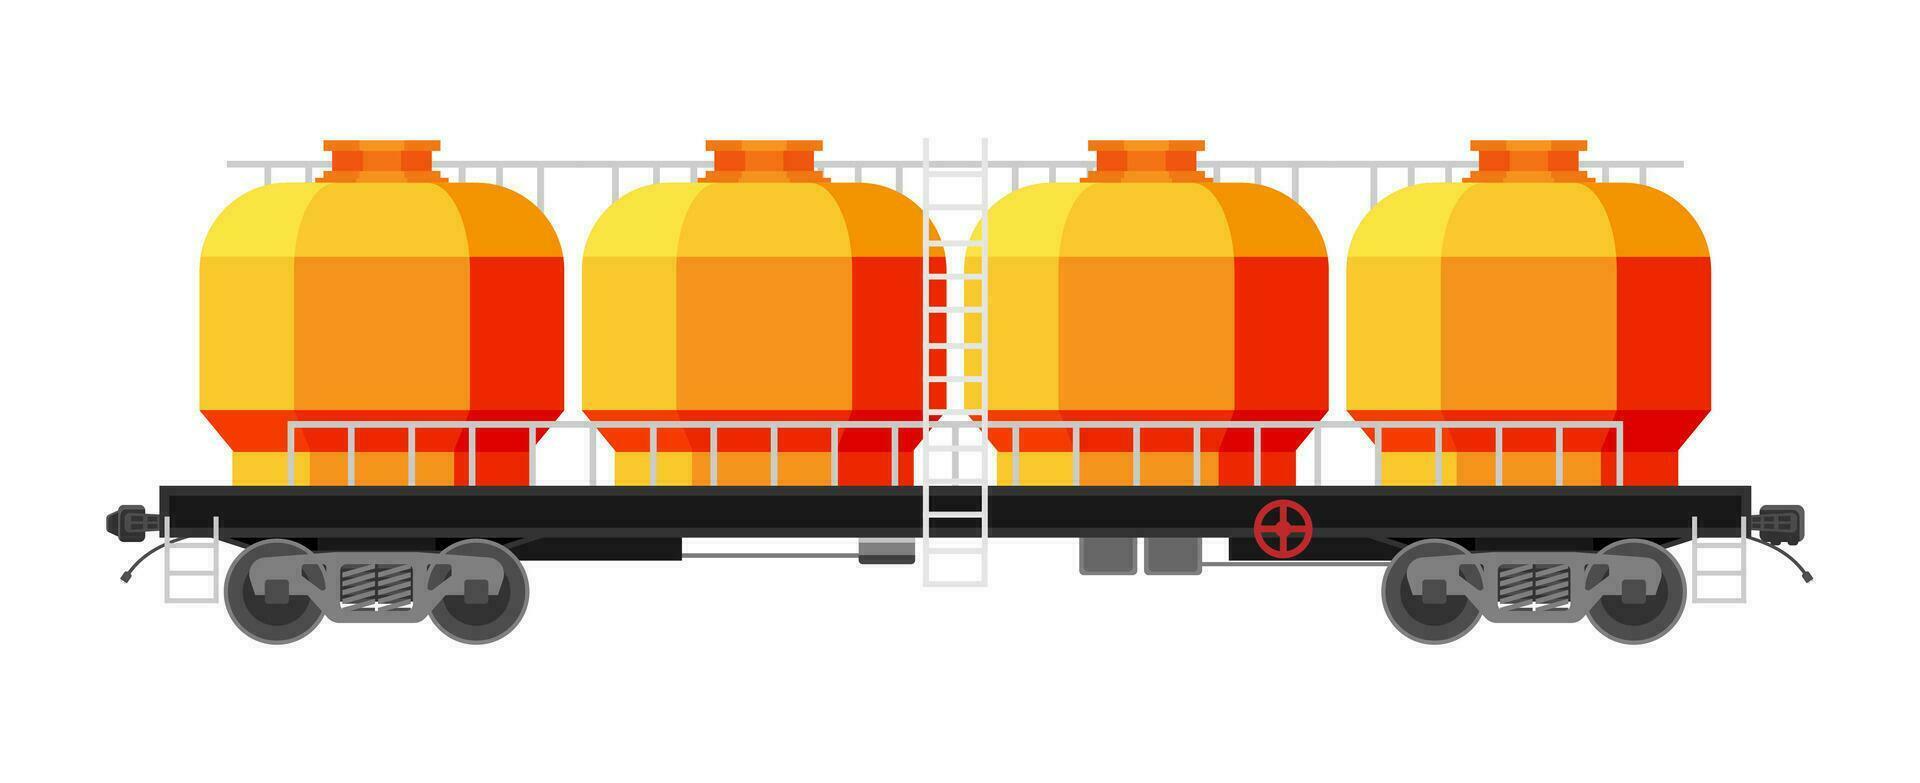 Hopper car isolated on white. Railway car the tank. Freight boxcar wagon. Flatcar part of cargo train for mass transit cement, grain and other bulk cargo. Flat vector illustration